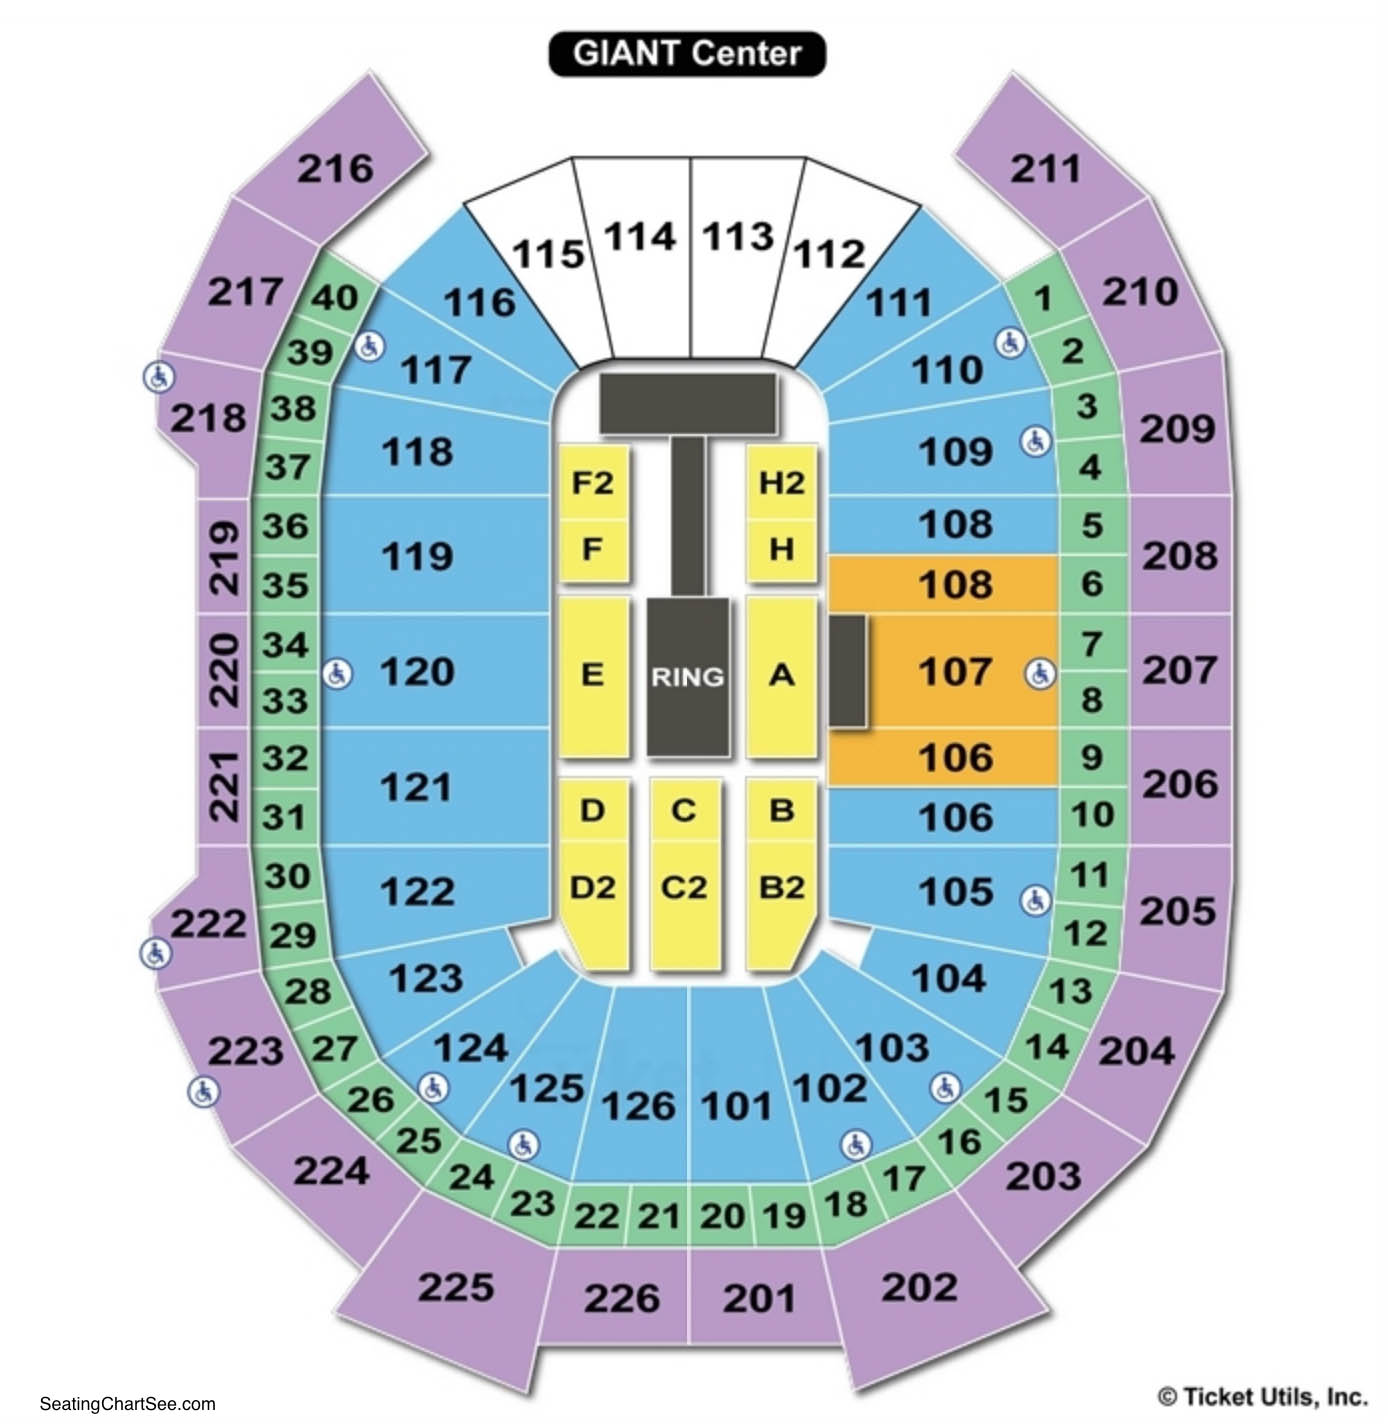 Giant Center Seating Chart WWE.